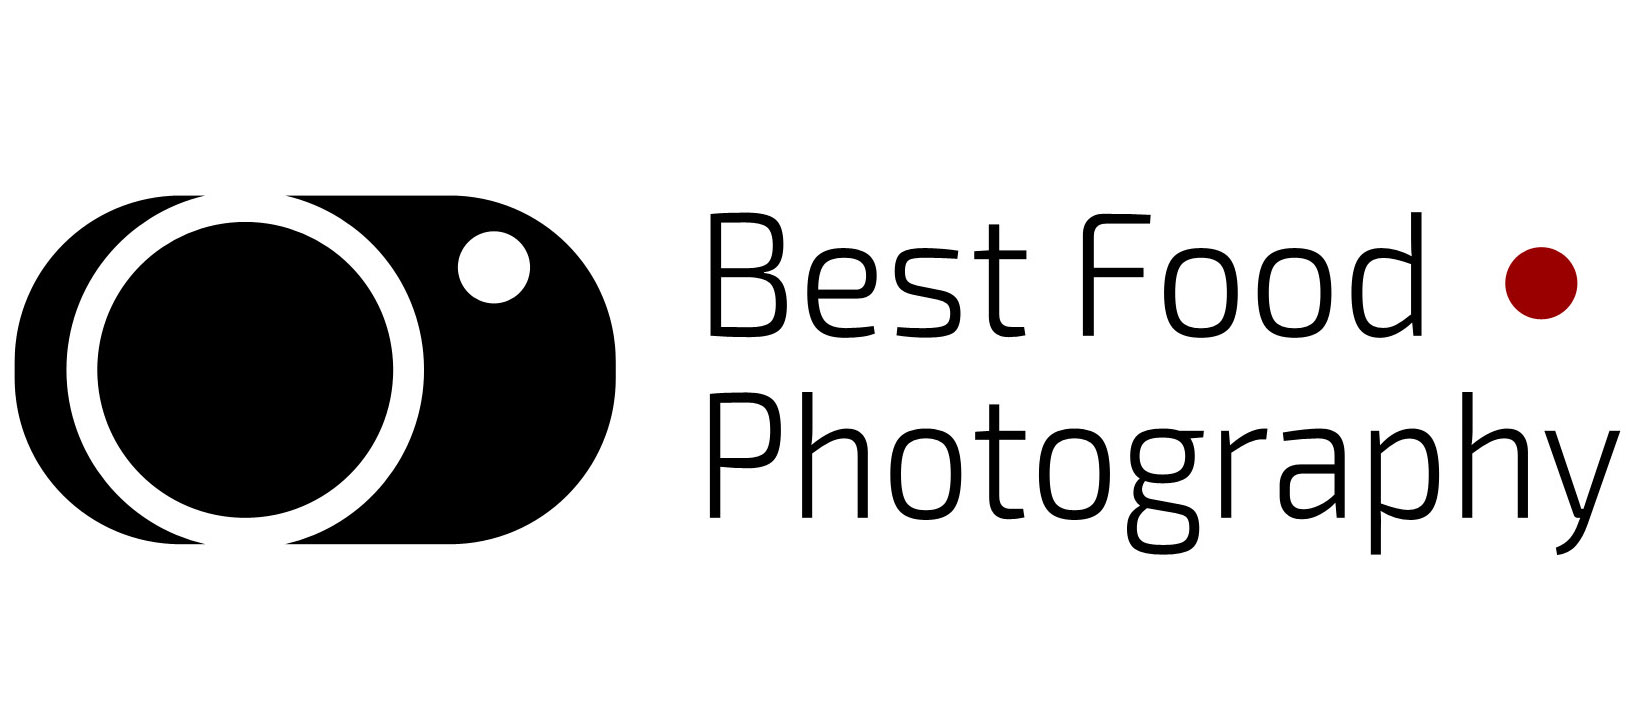 Best Food Photography